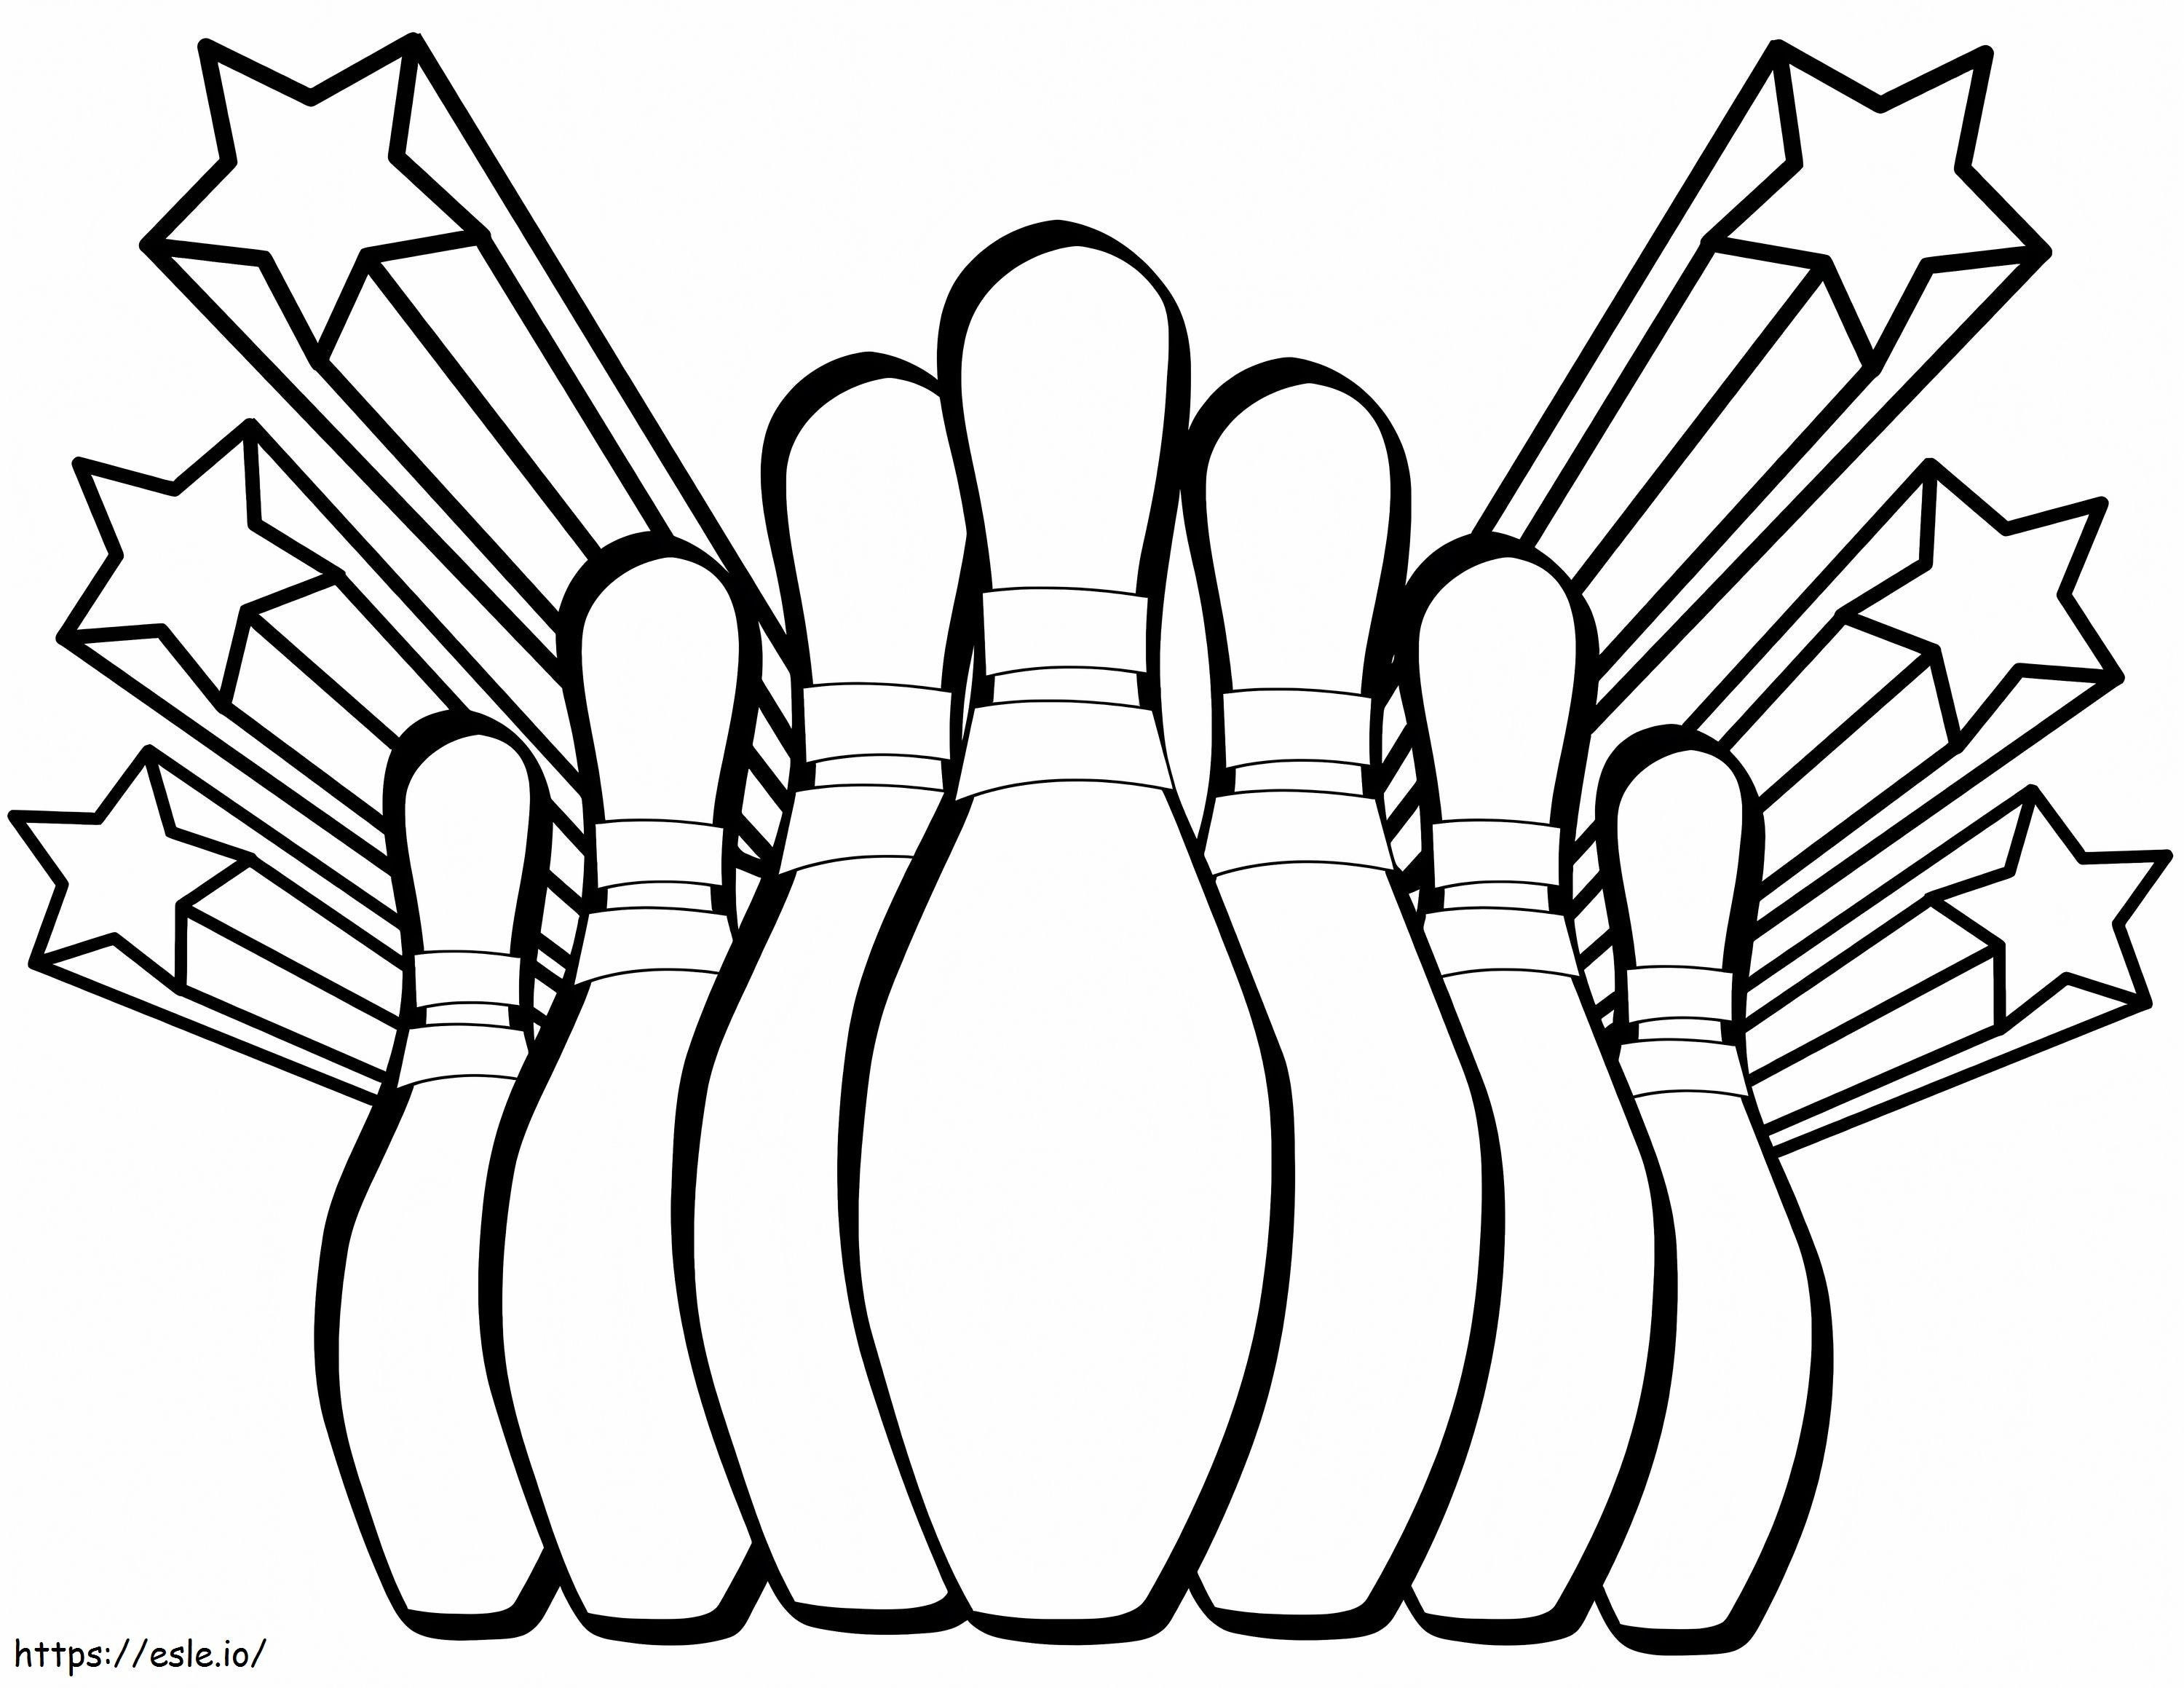 Bowling And Star coloring page